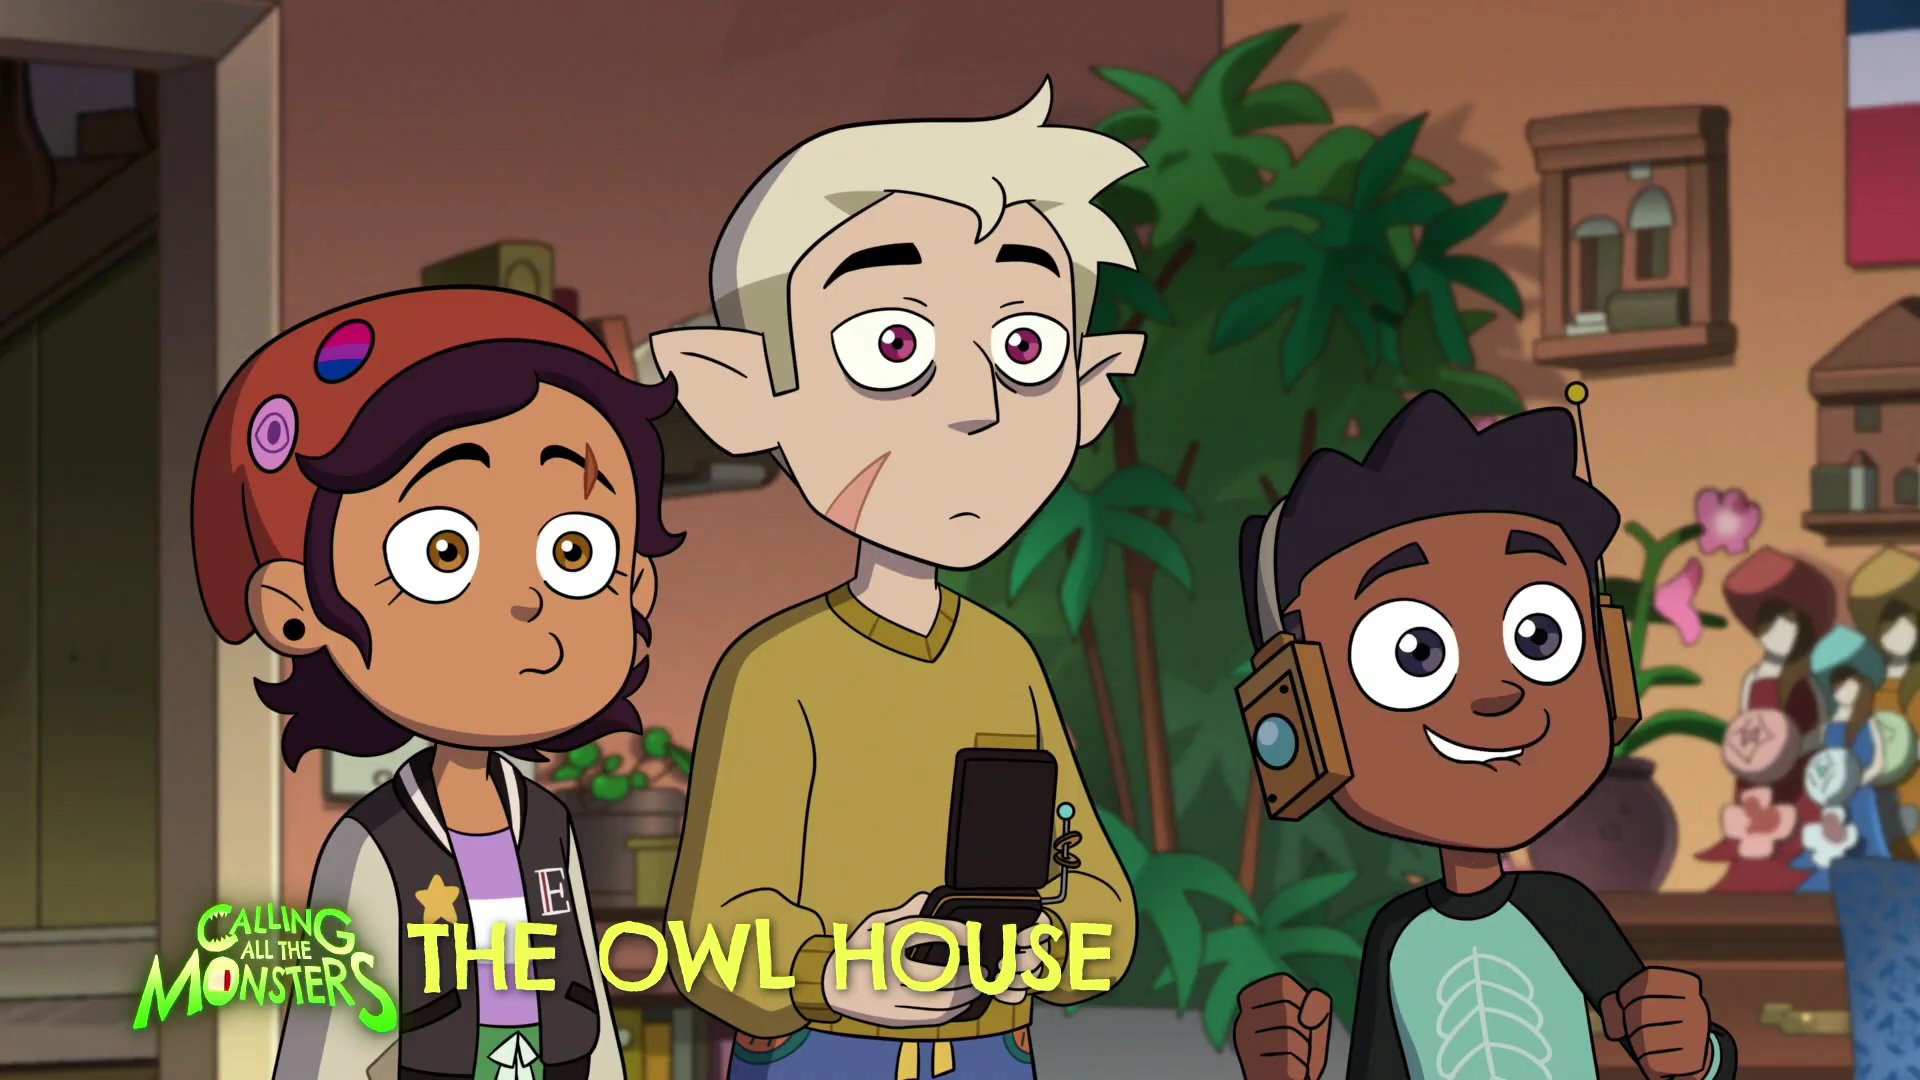 When Is The Owl House Season 3 Coming Out? - Disney Plus Informer